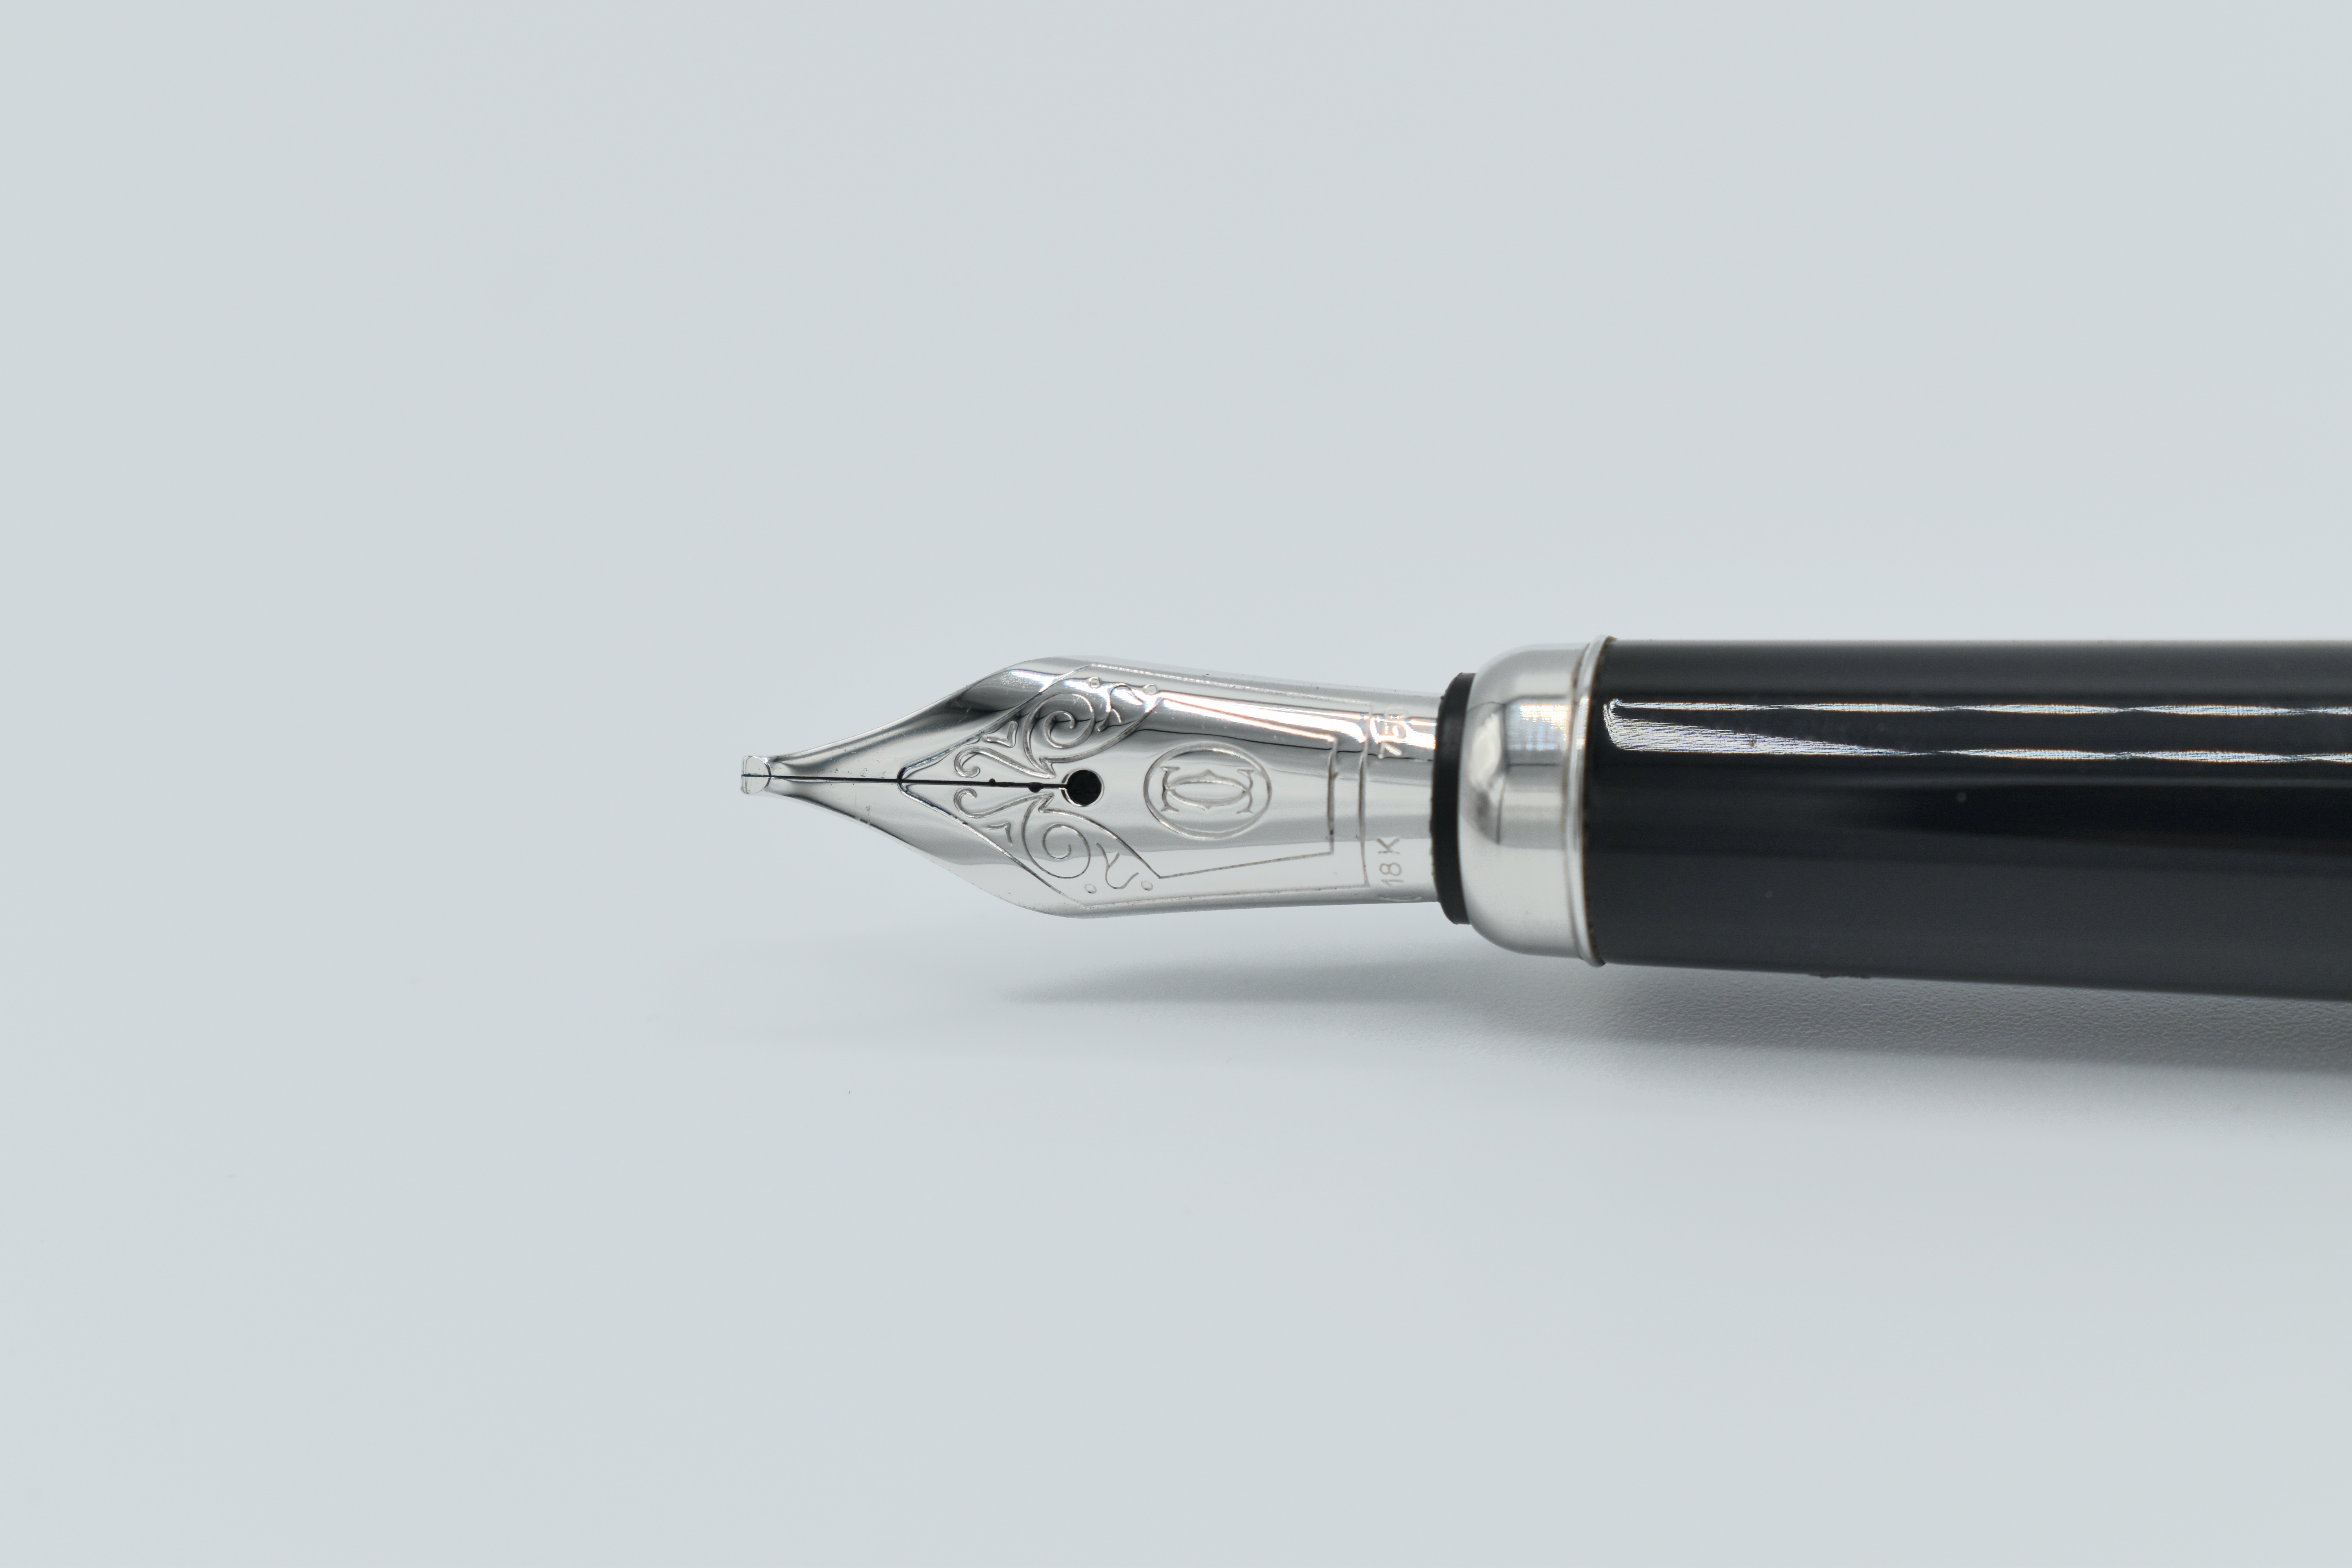 Brand New - Incredibly Rare - Cartier Limited Edition Platinum Calligraphy Fountain Pen - 2001 - Image 7 of 7